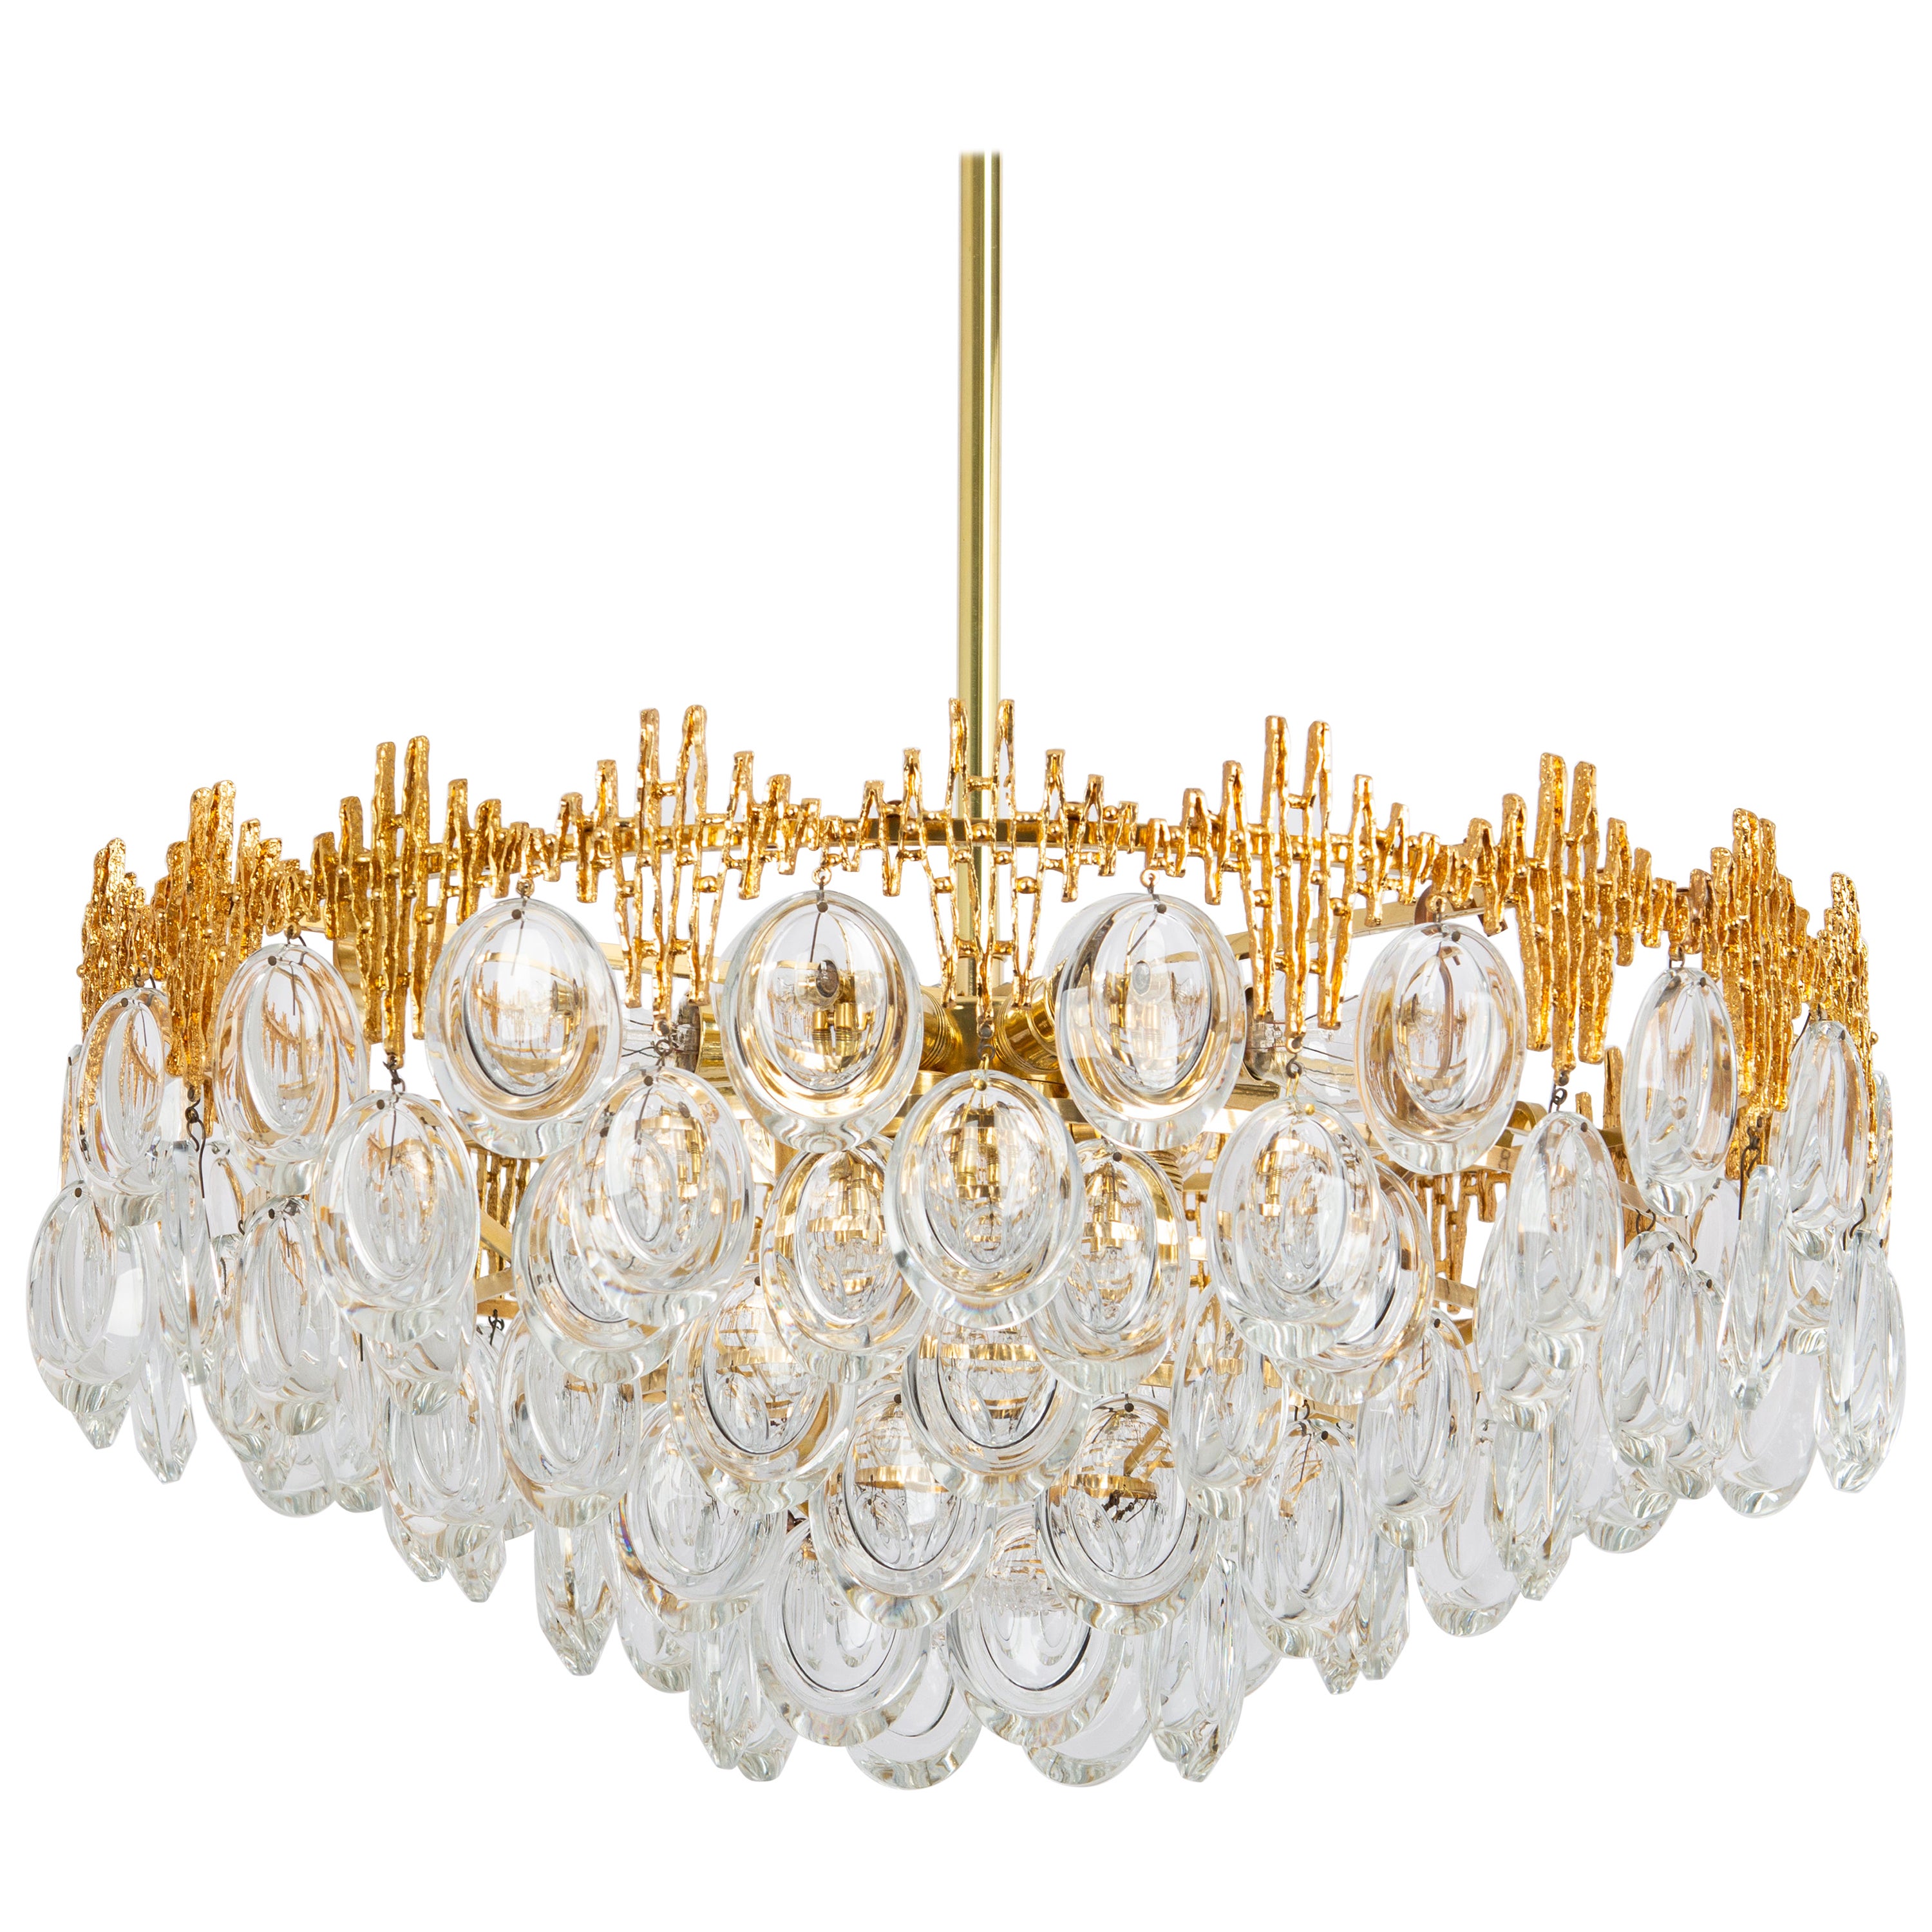 Stunning Large Brass and Crystal Chandelier, by Palwa, Germany, 1970s For Sale